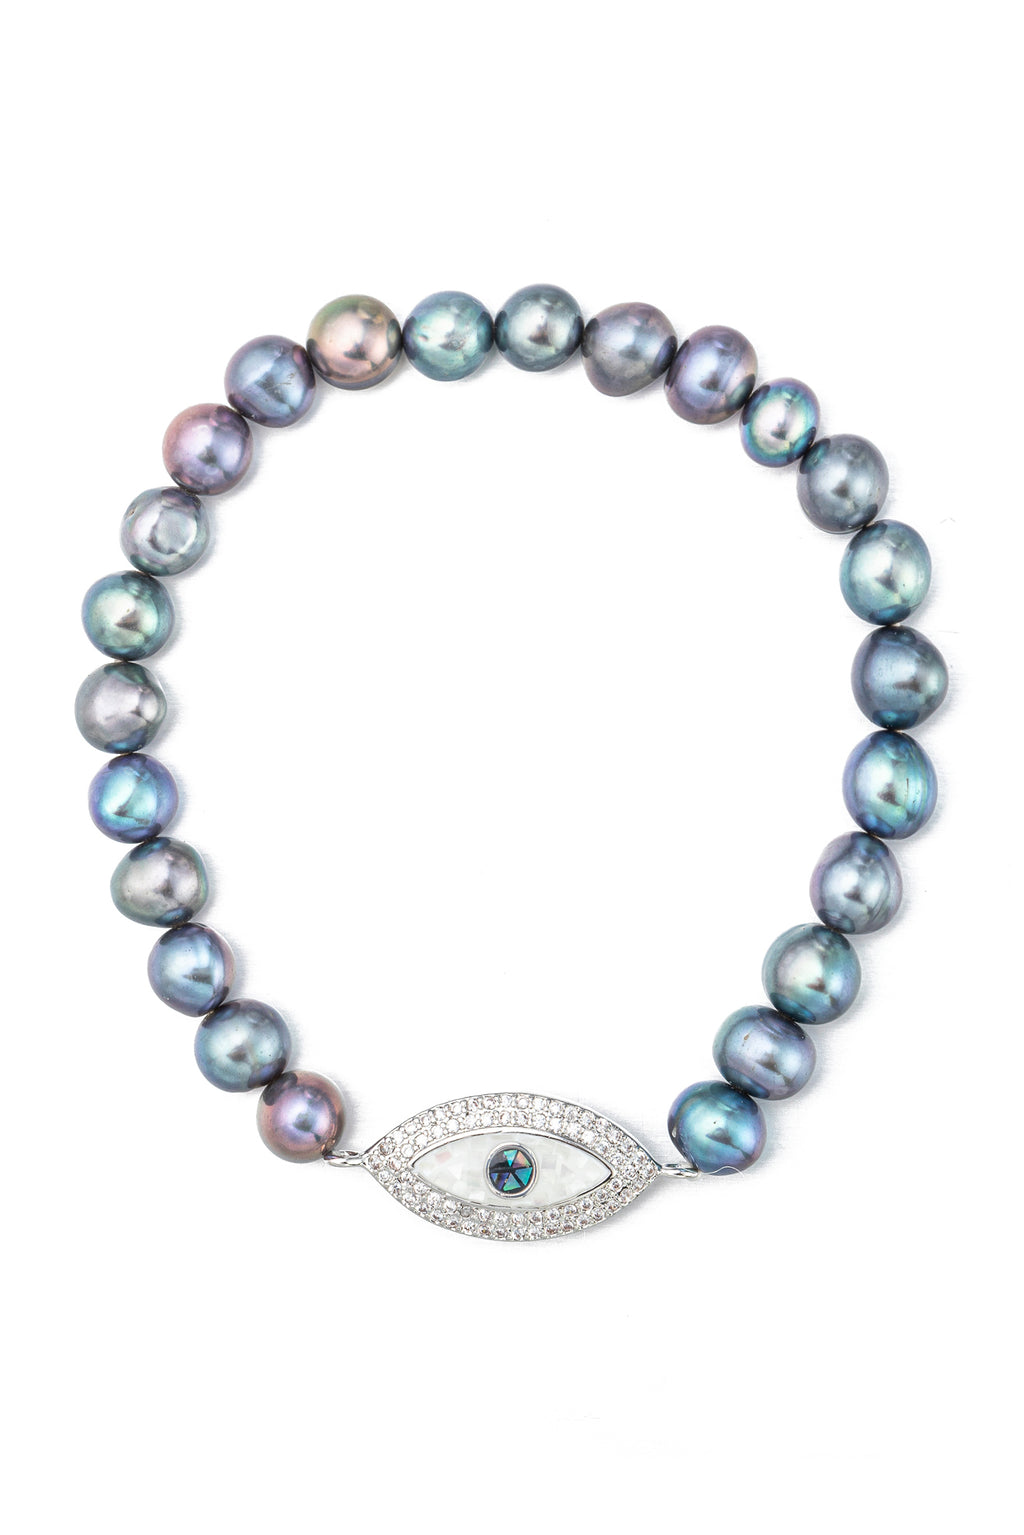 Peacock pearl stretch bracelet with an eye pendant that is studded with CZ crystals.